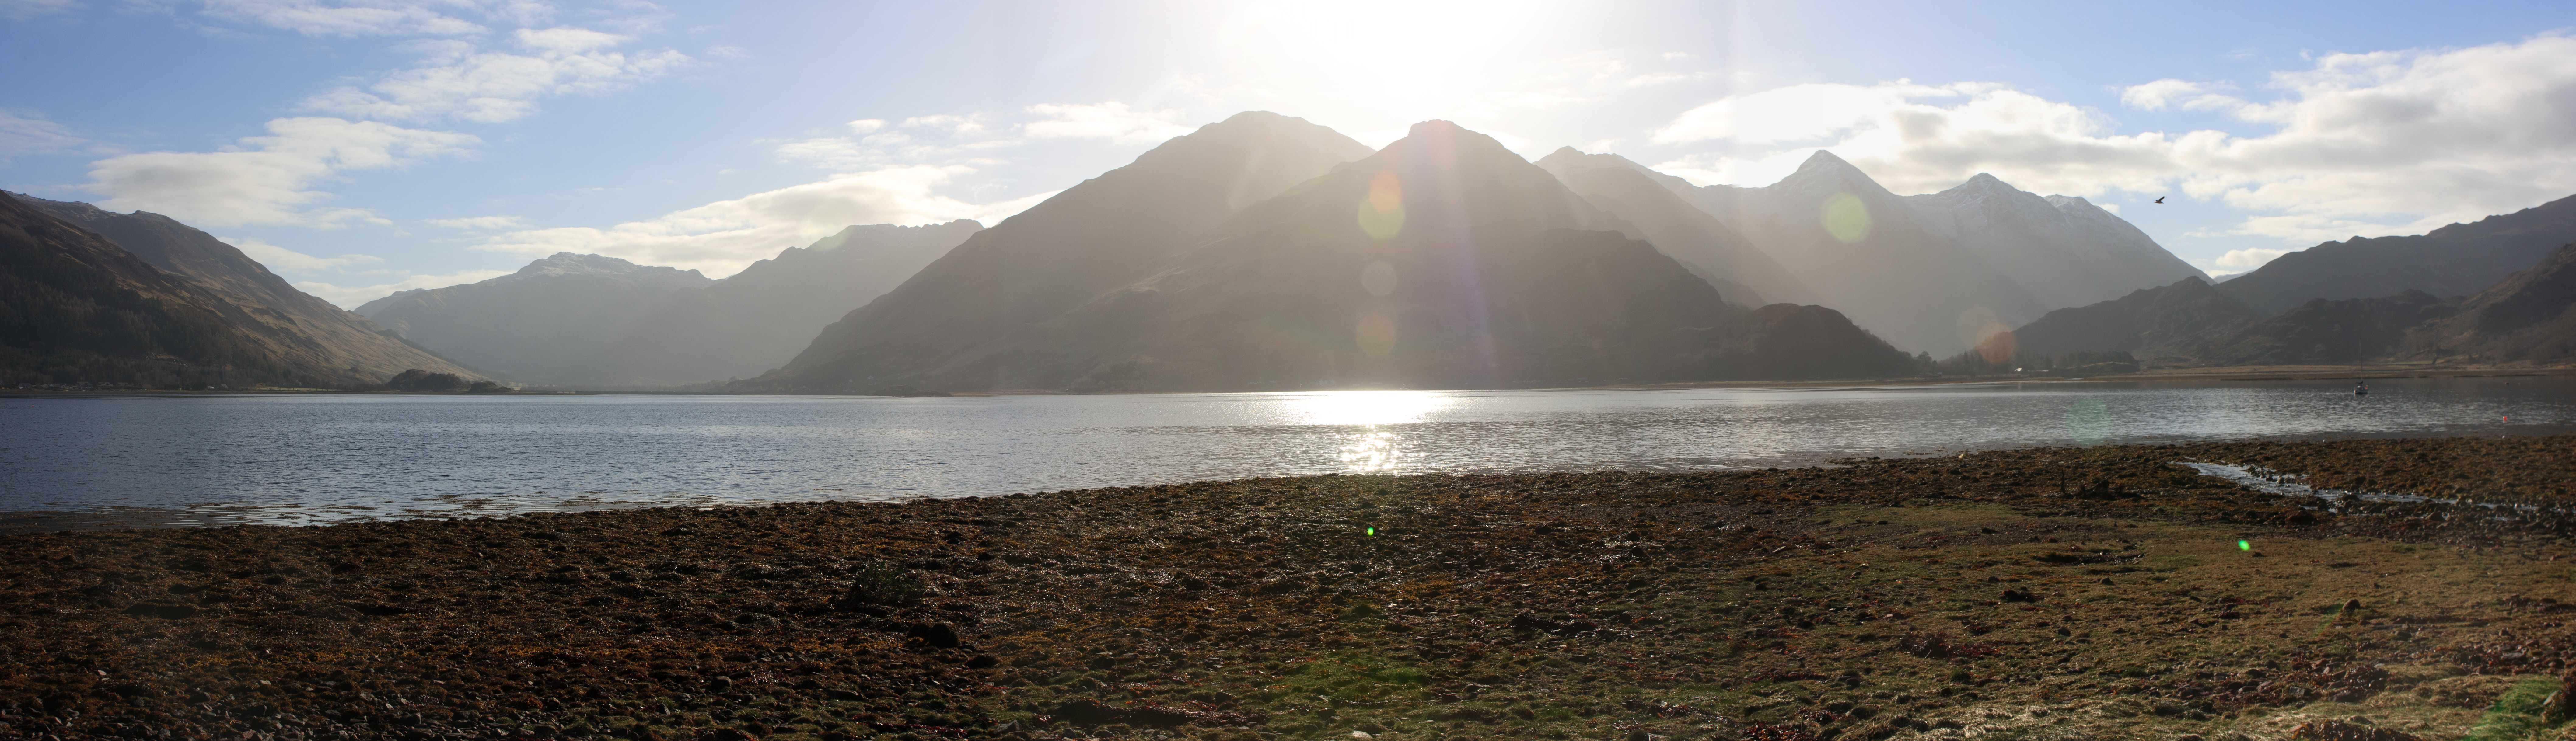 Five Sisters of Kintail from Ratagan Youth Hostel looking across Loch Duich